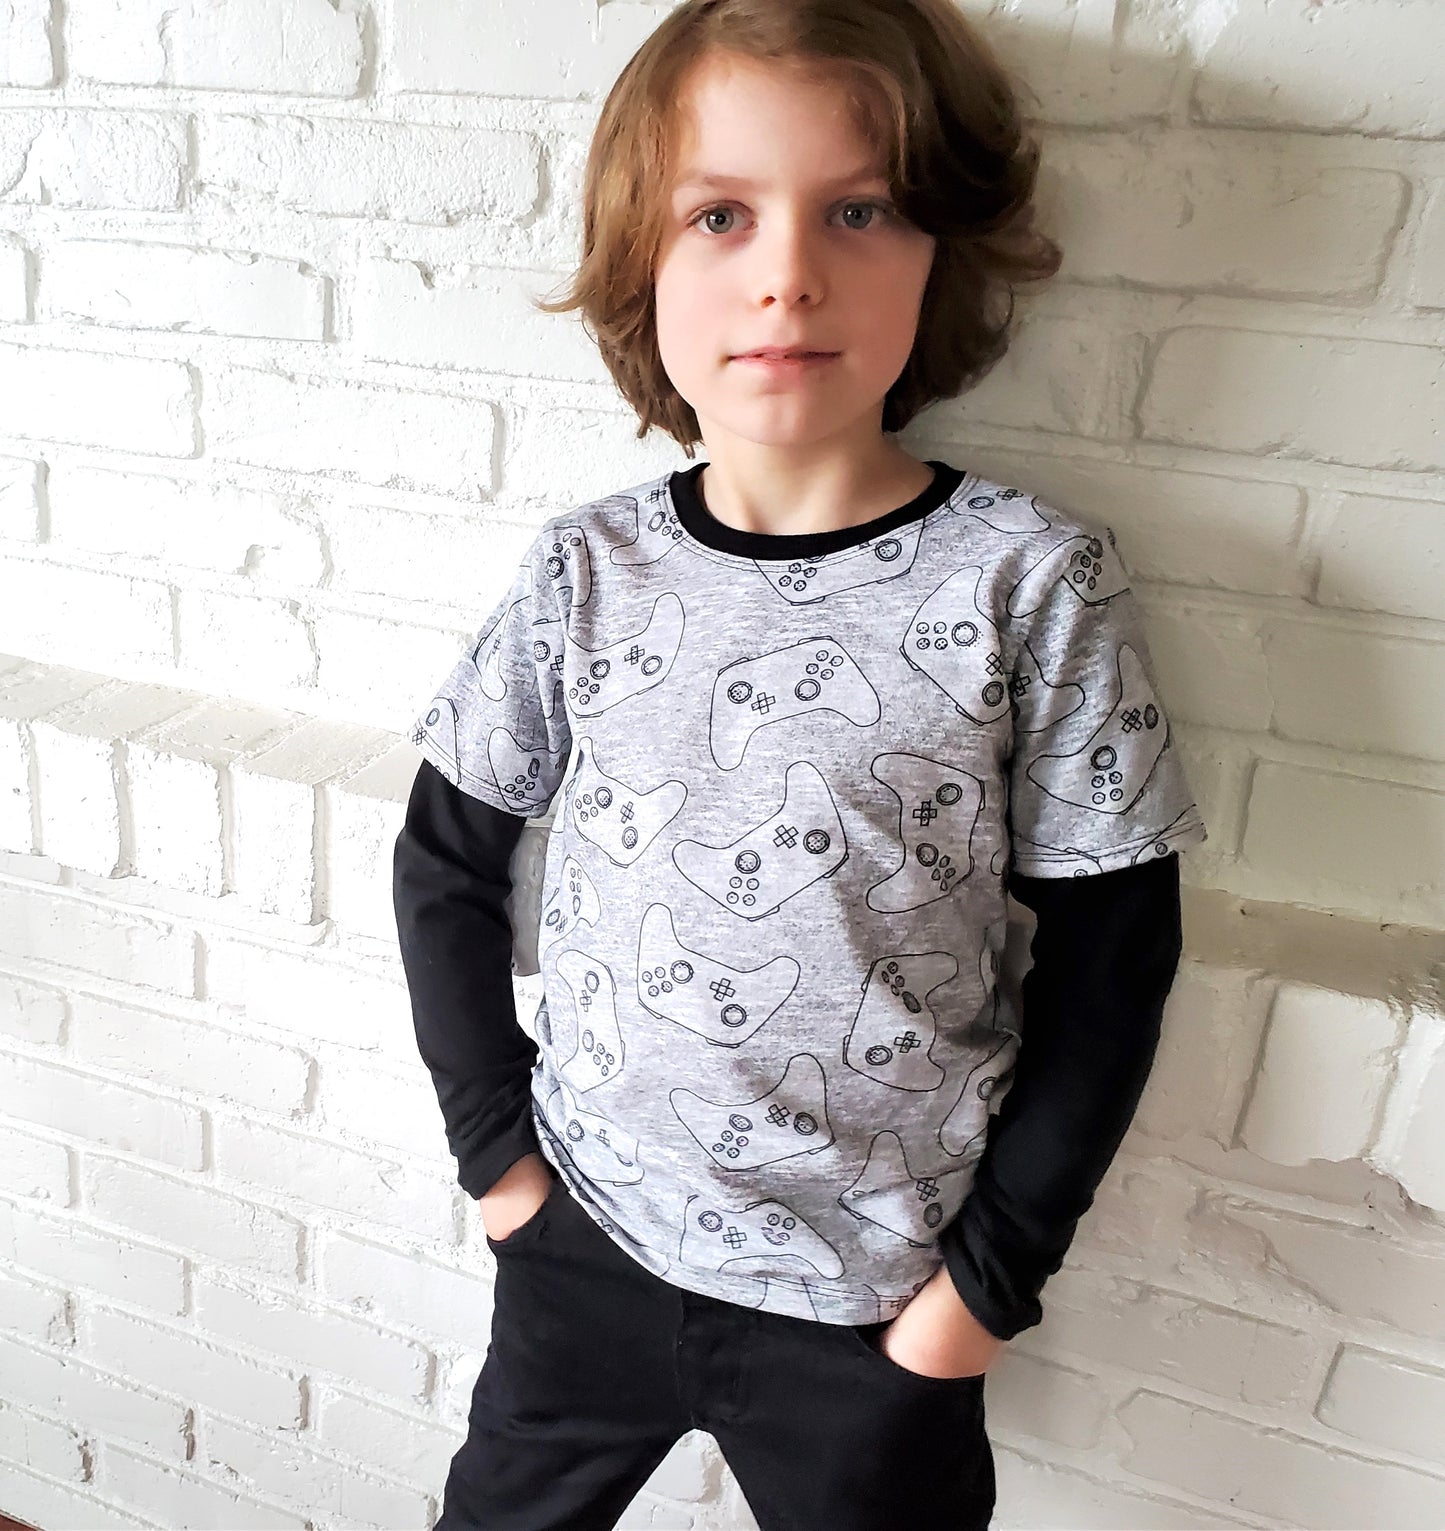 Game Controller Shirt for Kids